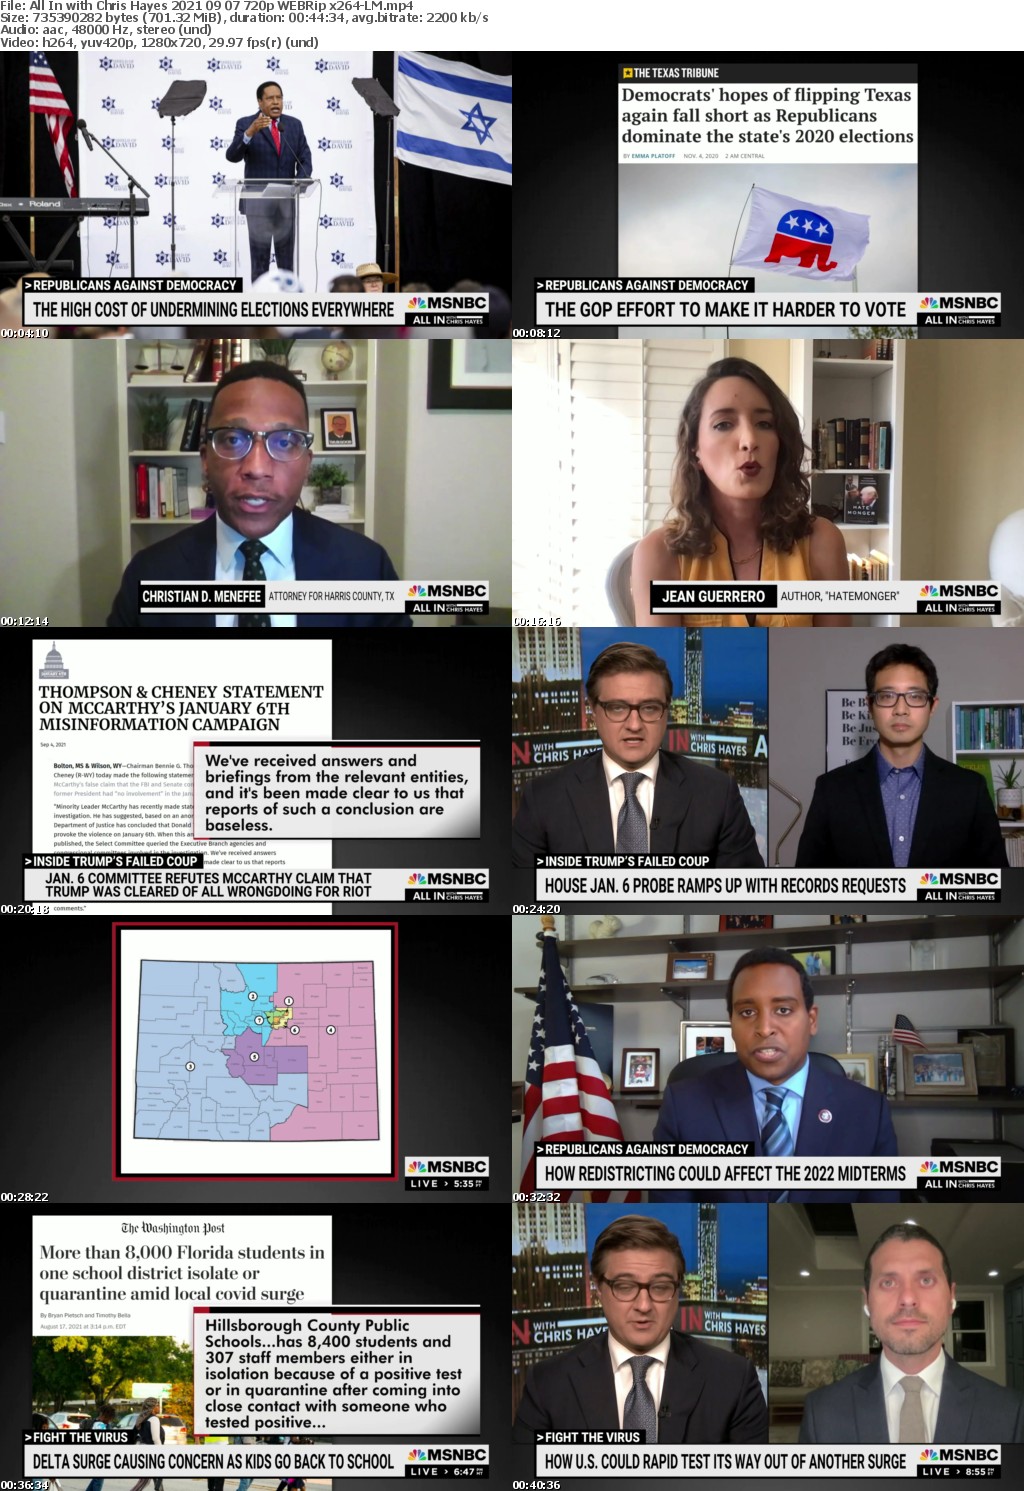 All In with Chris Hayes 2021 09 07 720p WEBRip x264-LM